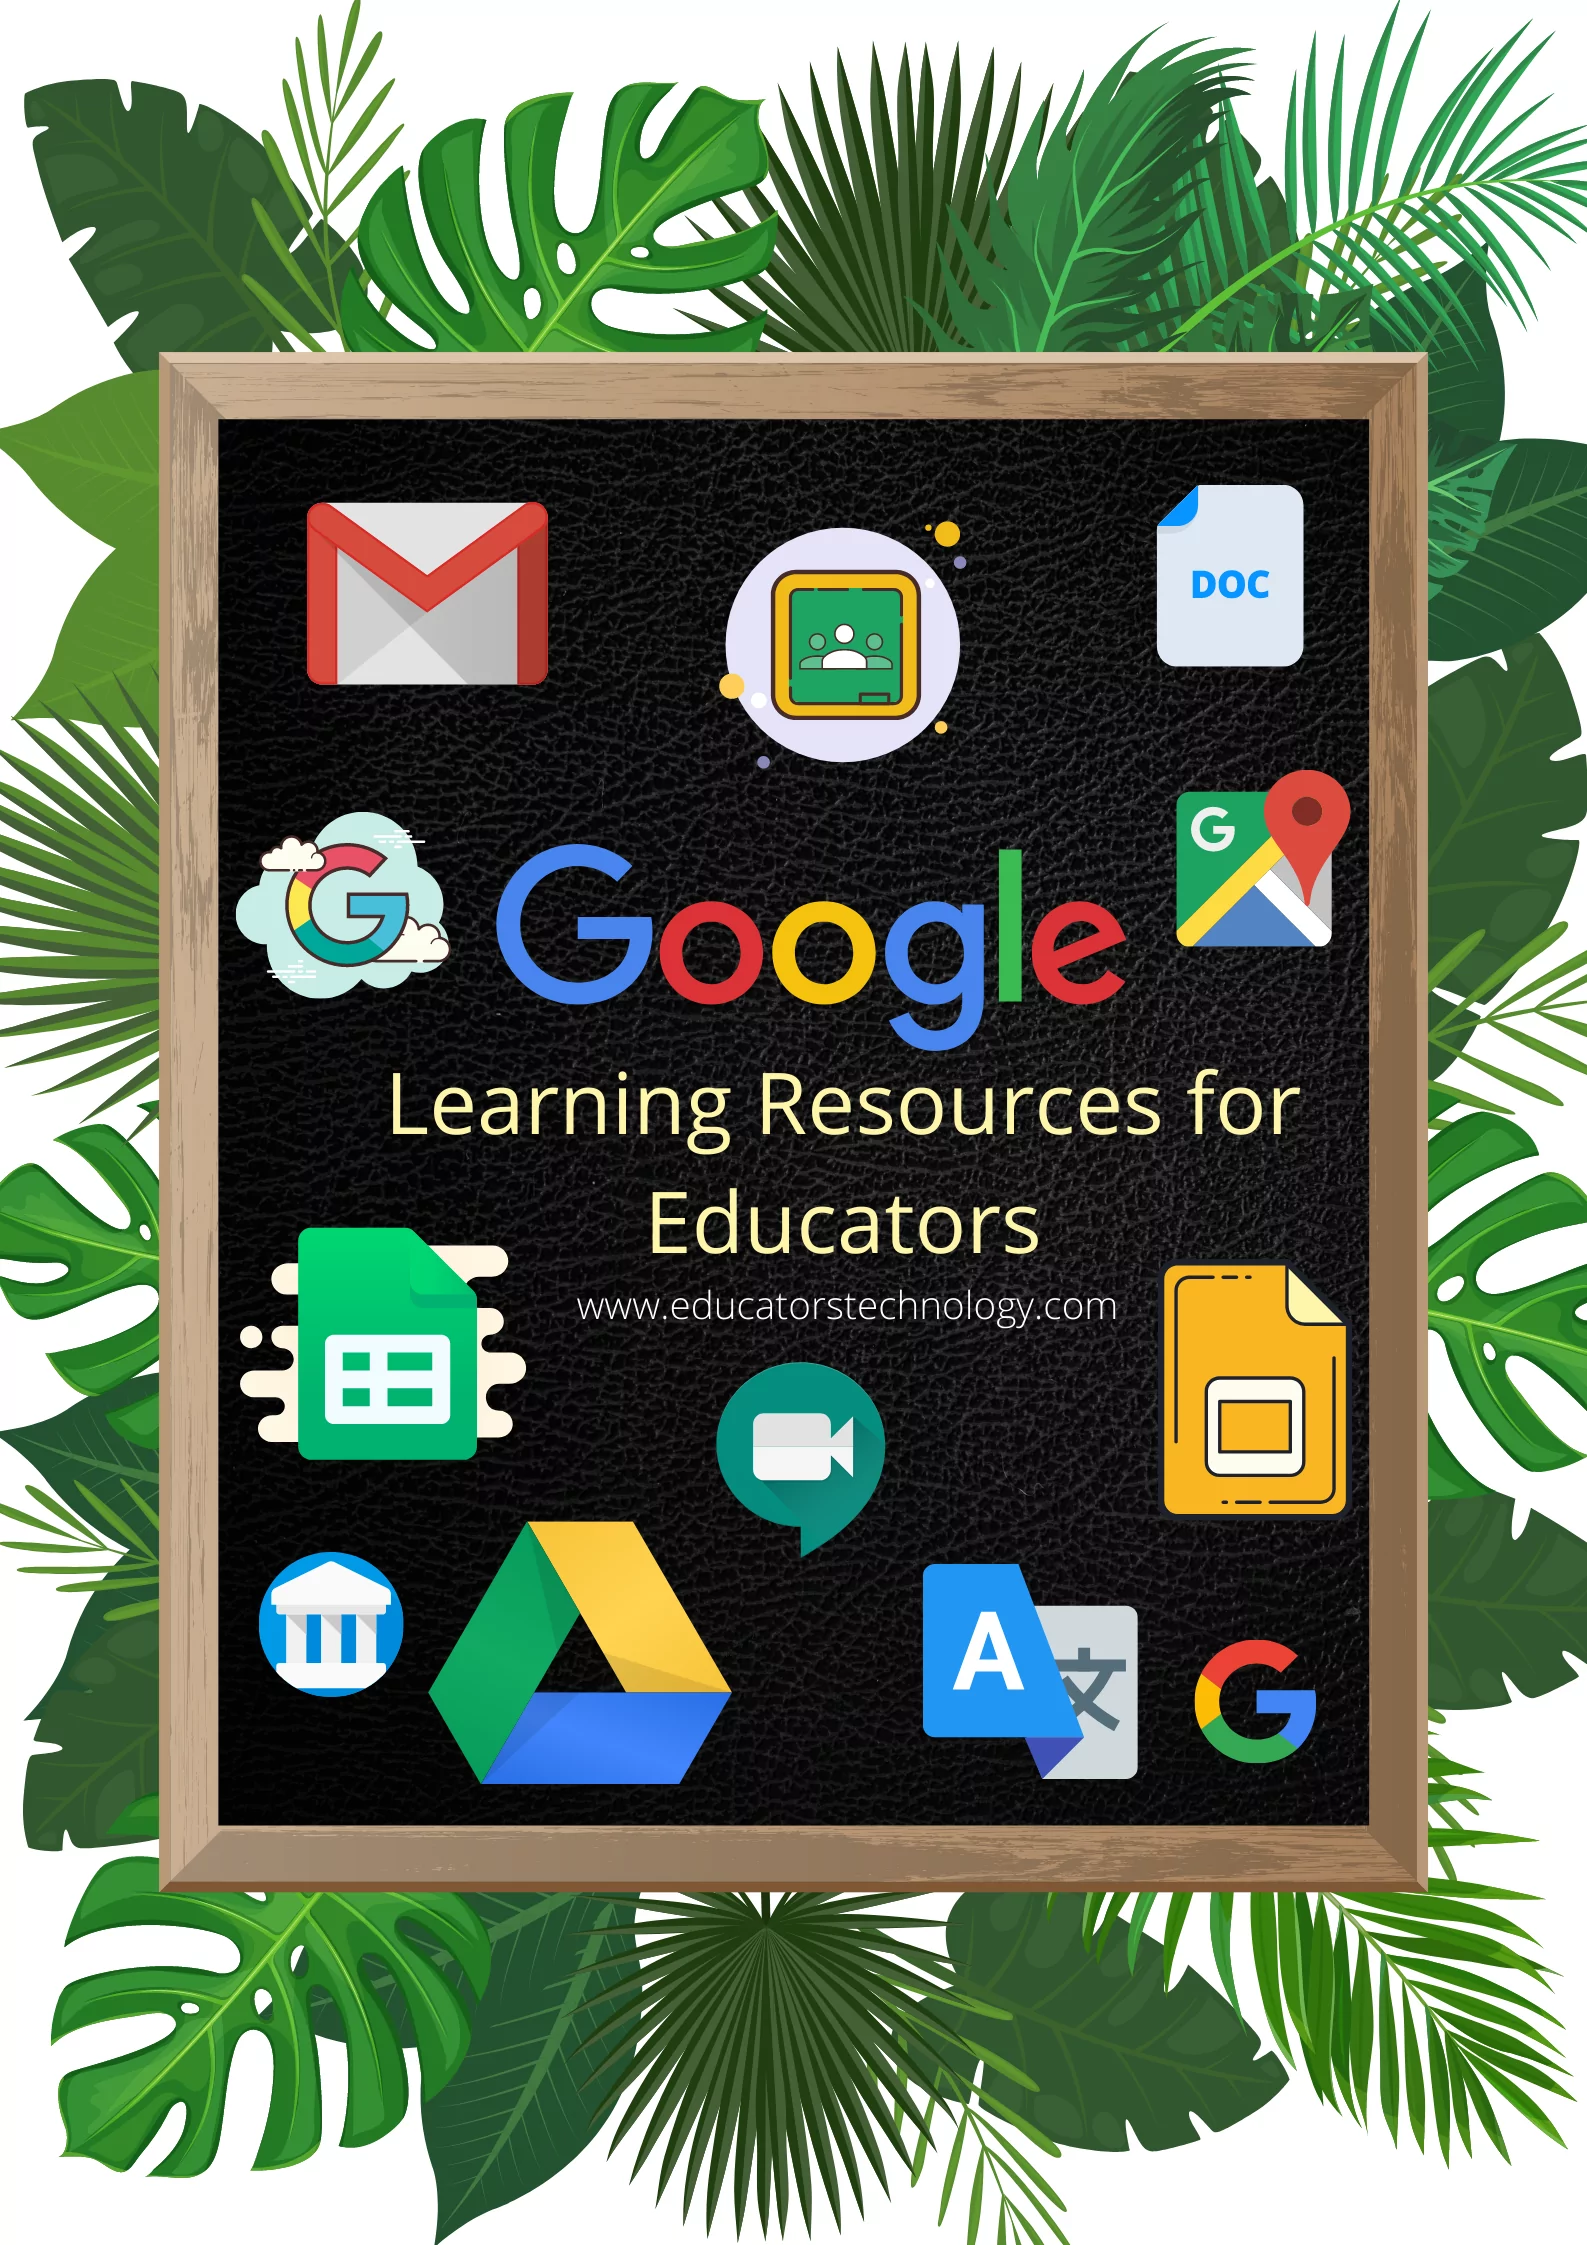 Google Learning Provides Tons of Free Educational Resources to Use in Your Class